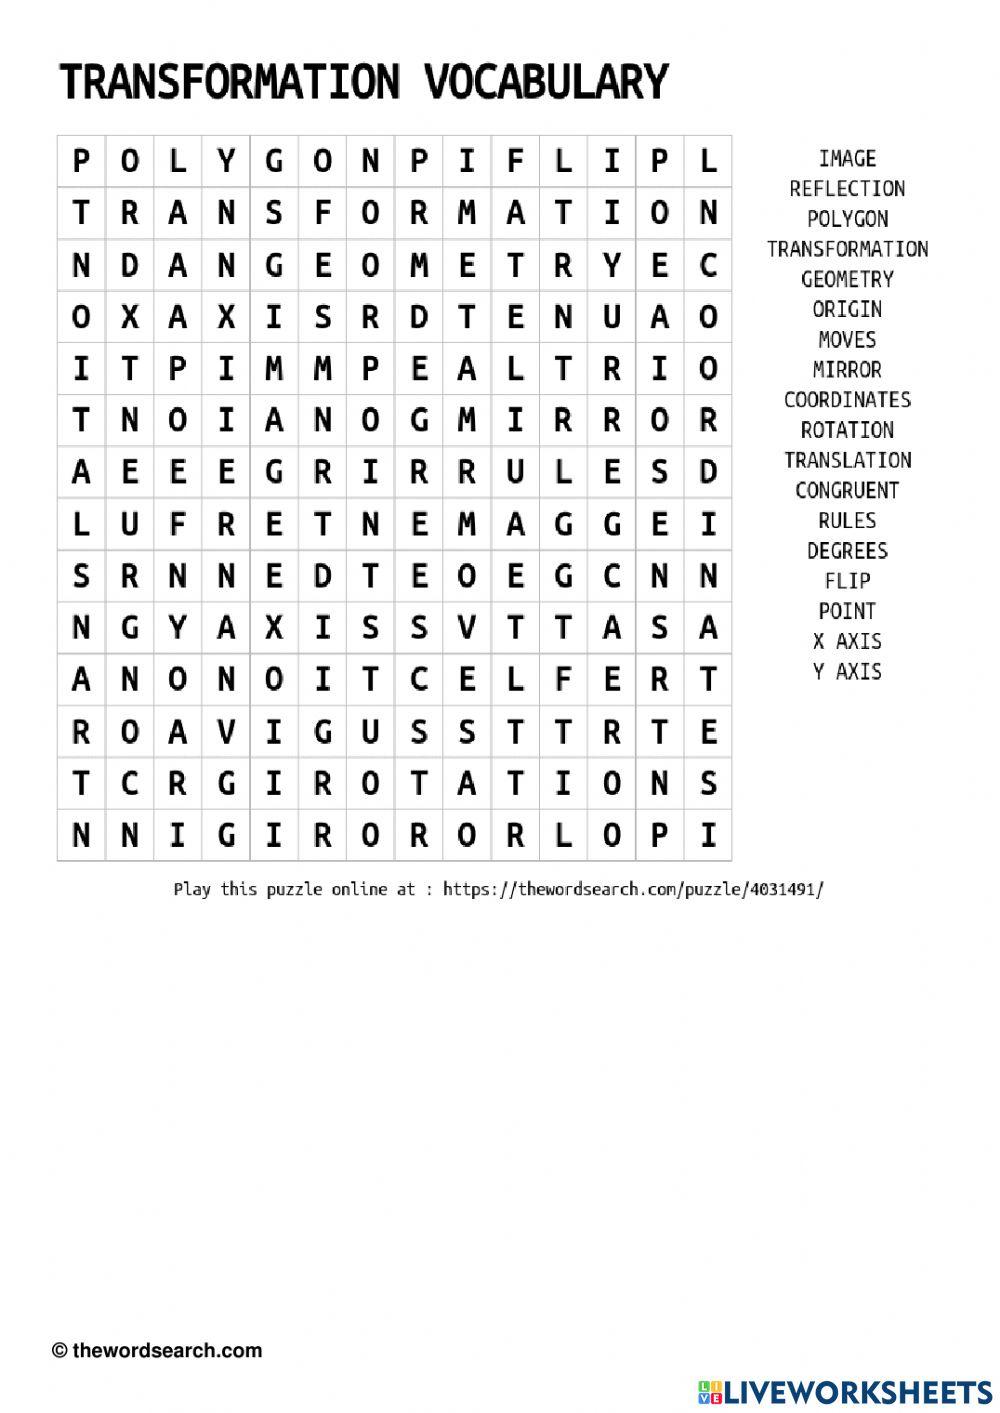 Word search-transformation vocabulary